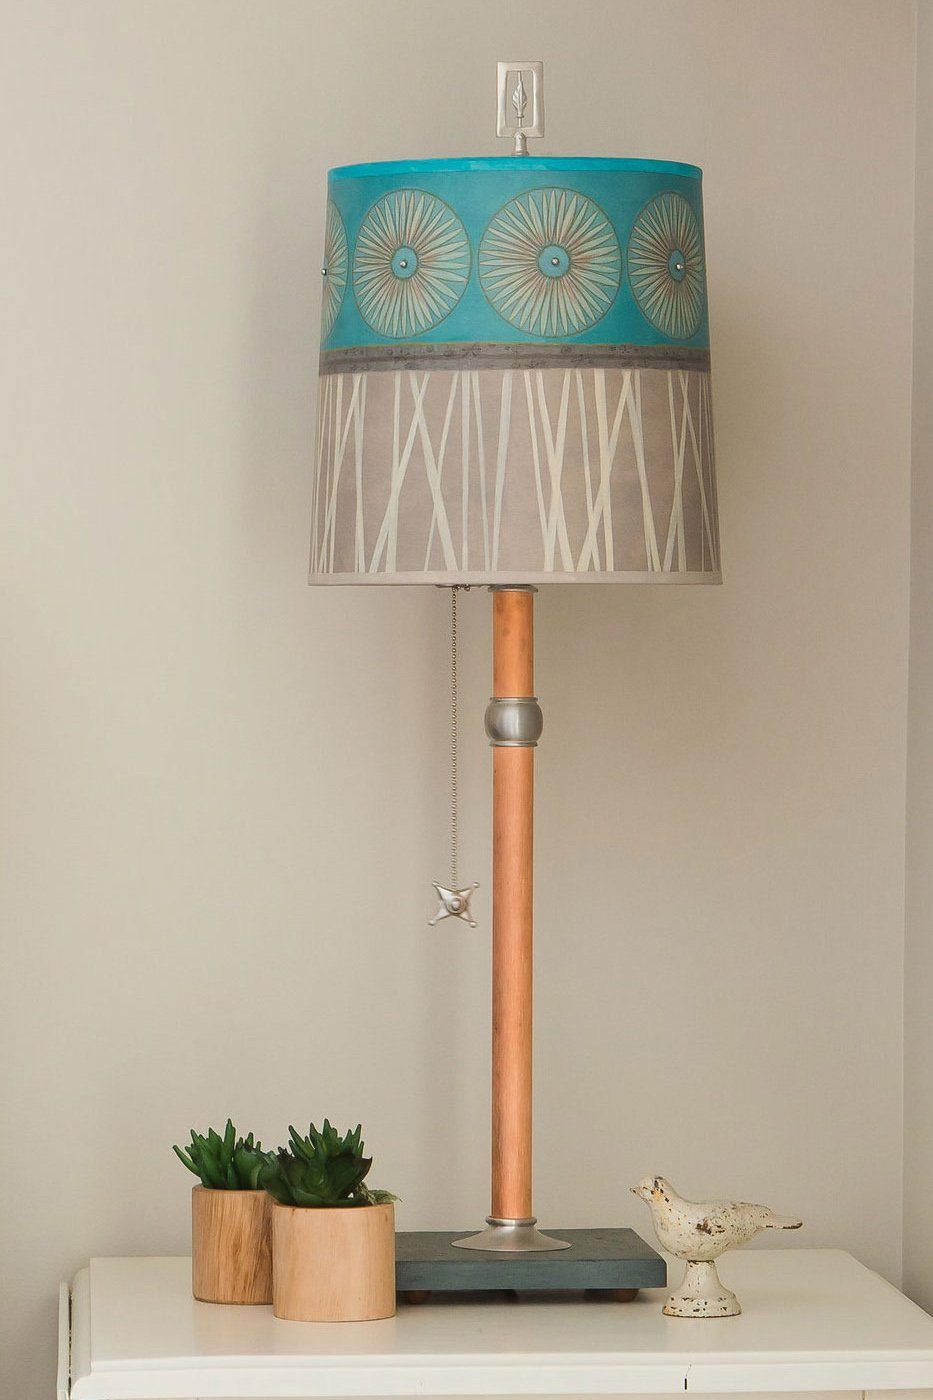 Janna Ugone & Co Table Lamps Copper Table Lamp with Medium Drum Shade in Pool